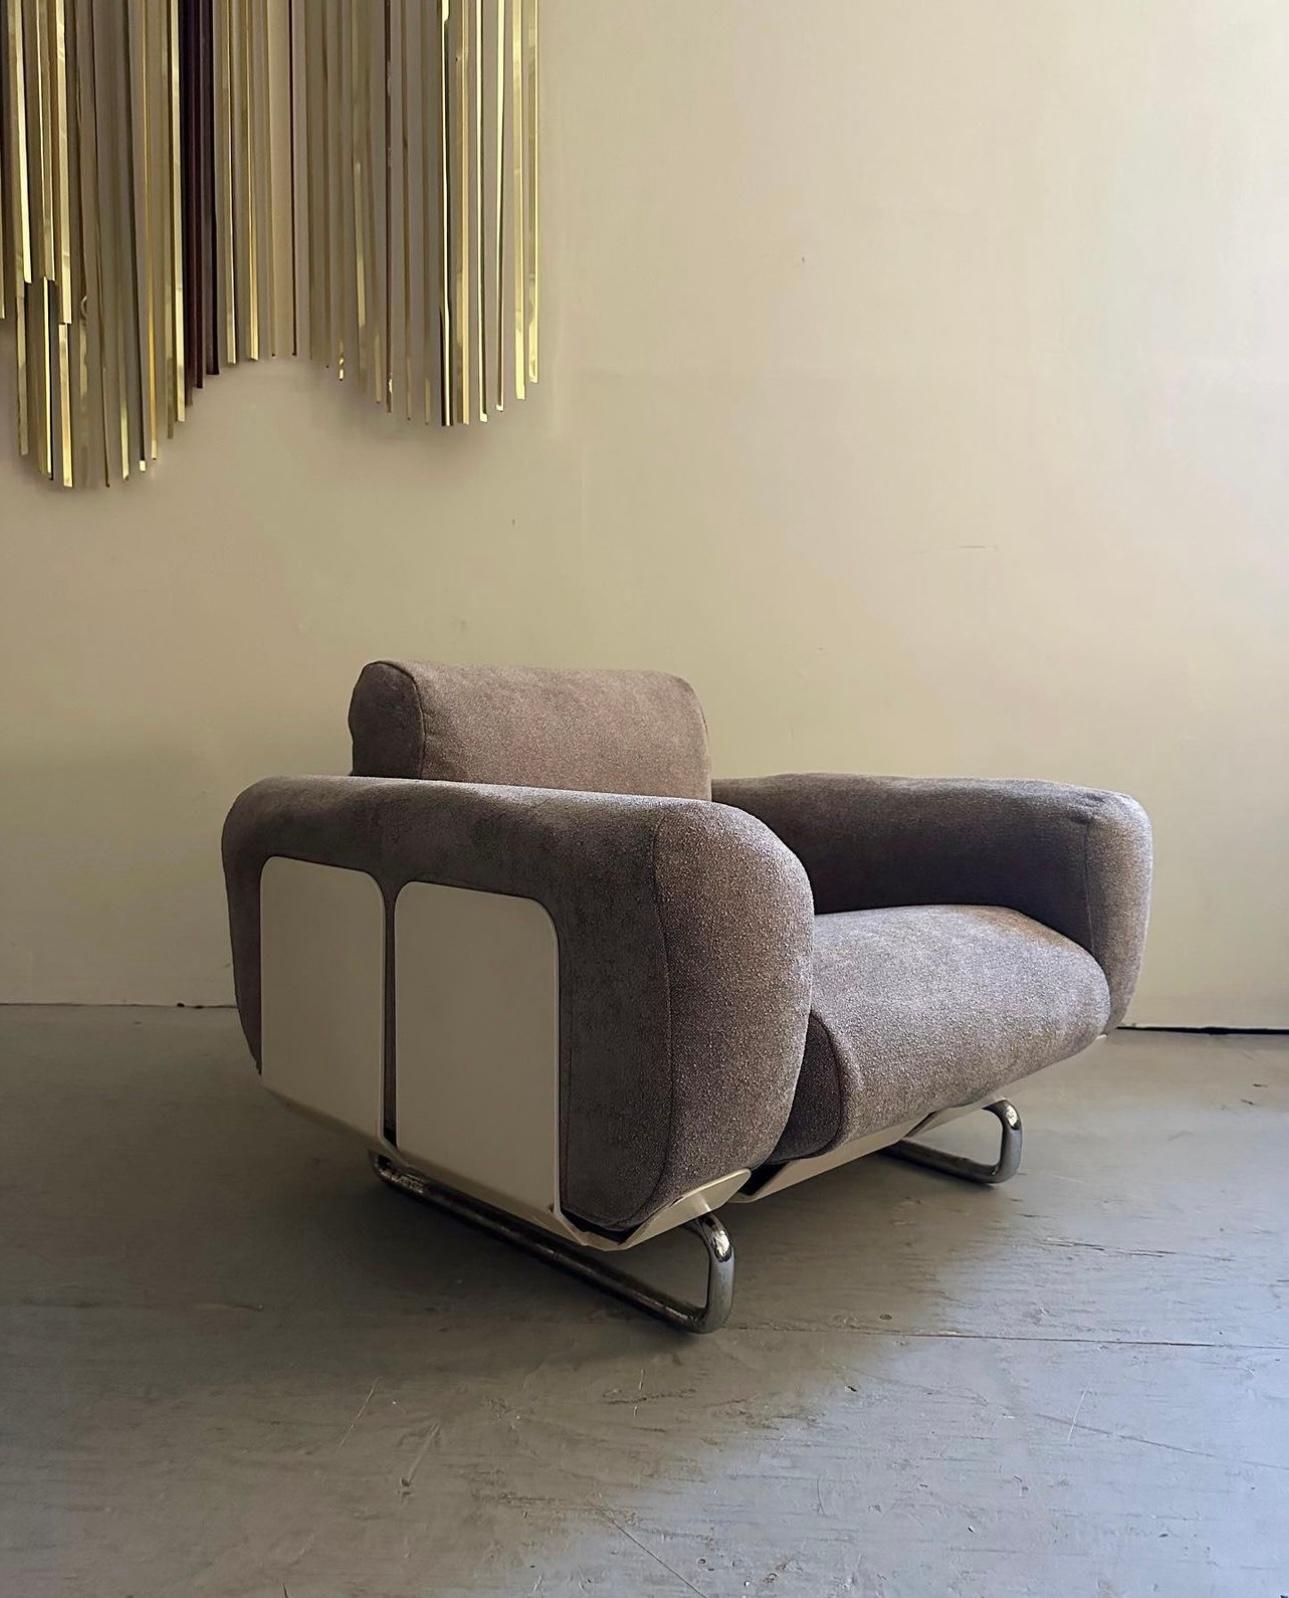 Italian Modern “Senzafine” Lounge chair designed by Eleonore Peduzzi Riva for Zanotta, 1969. This lounge chair has been reupholstered in a premium nubby cotton / wool blend fabric. The back and seat cushion has a built in sleeve that slips over the